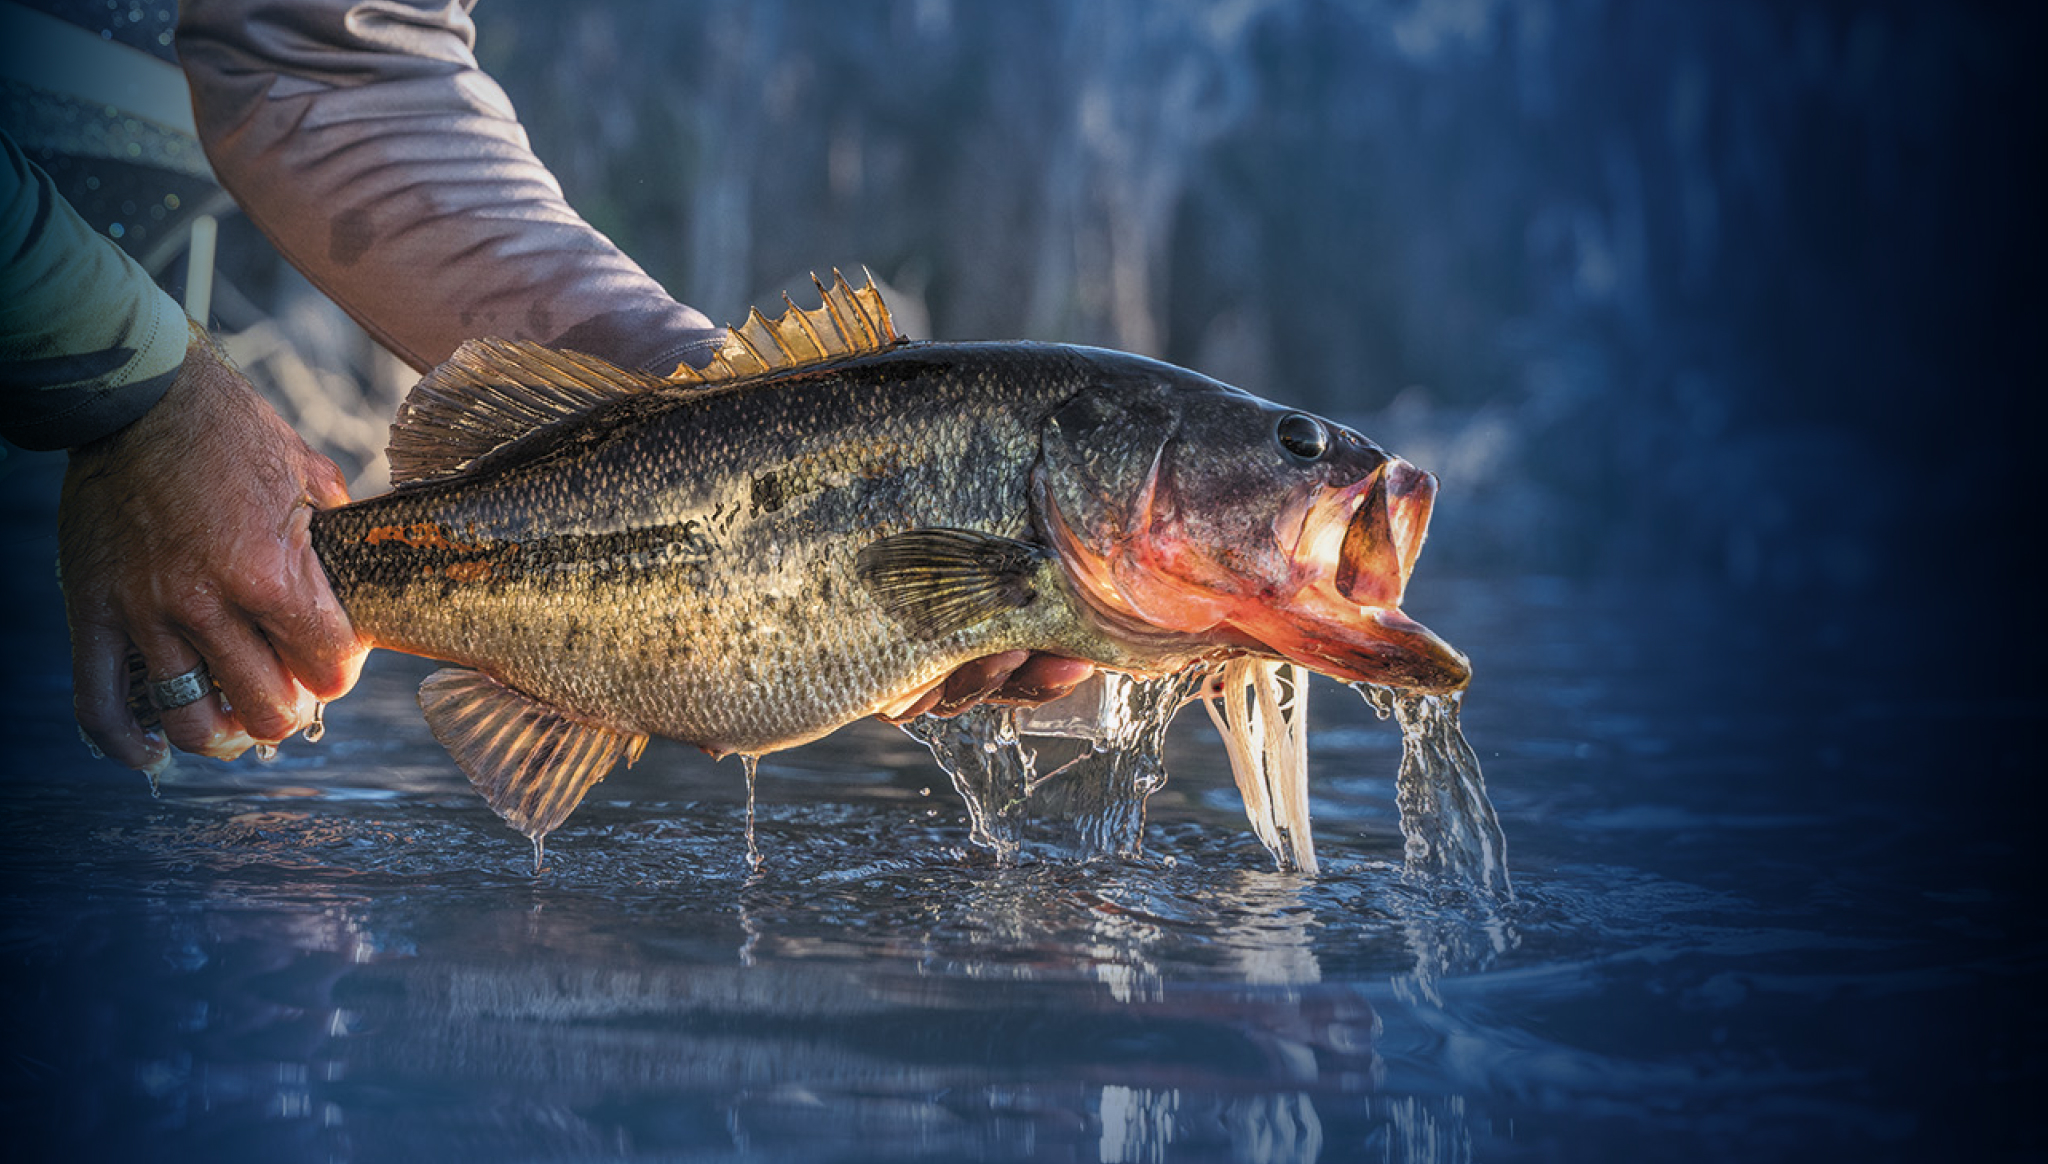 Bass Pro Shops and Cabela's Spring Fishing Classic is stocked with savings  and fun for the whole family - Bass Pro